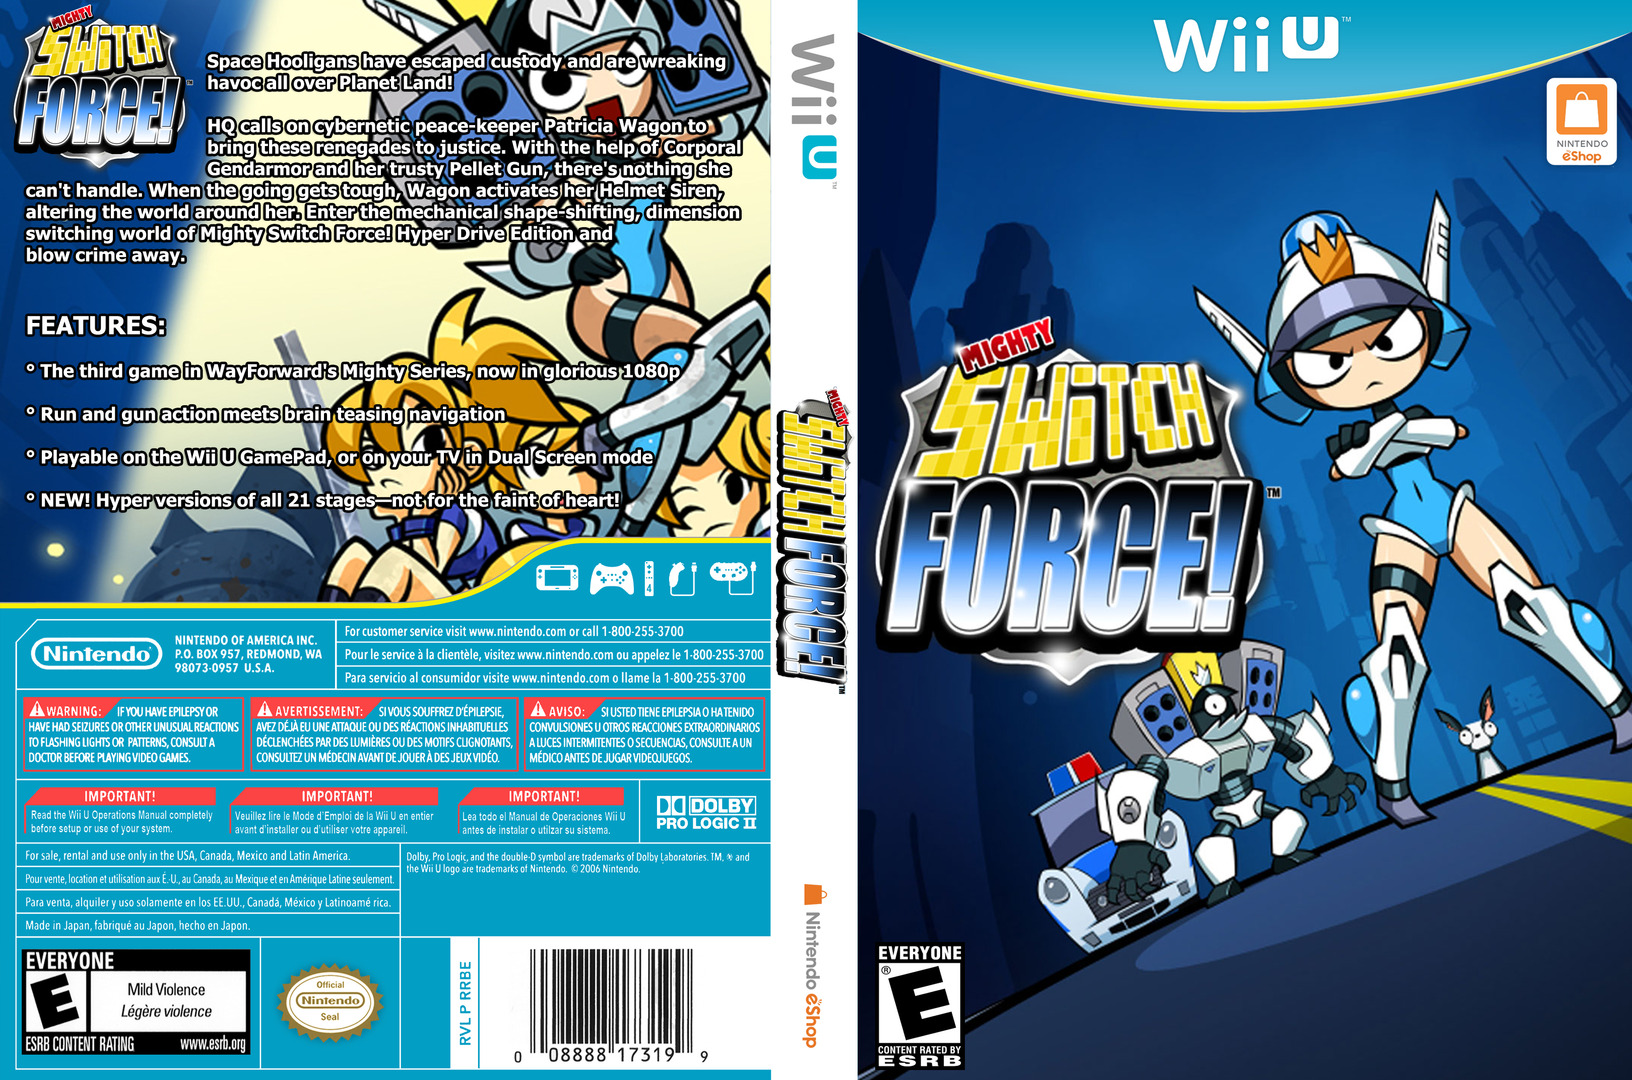 Mighty Switch Force! Hyper Drive Edition #20